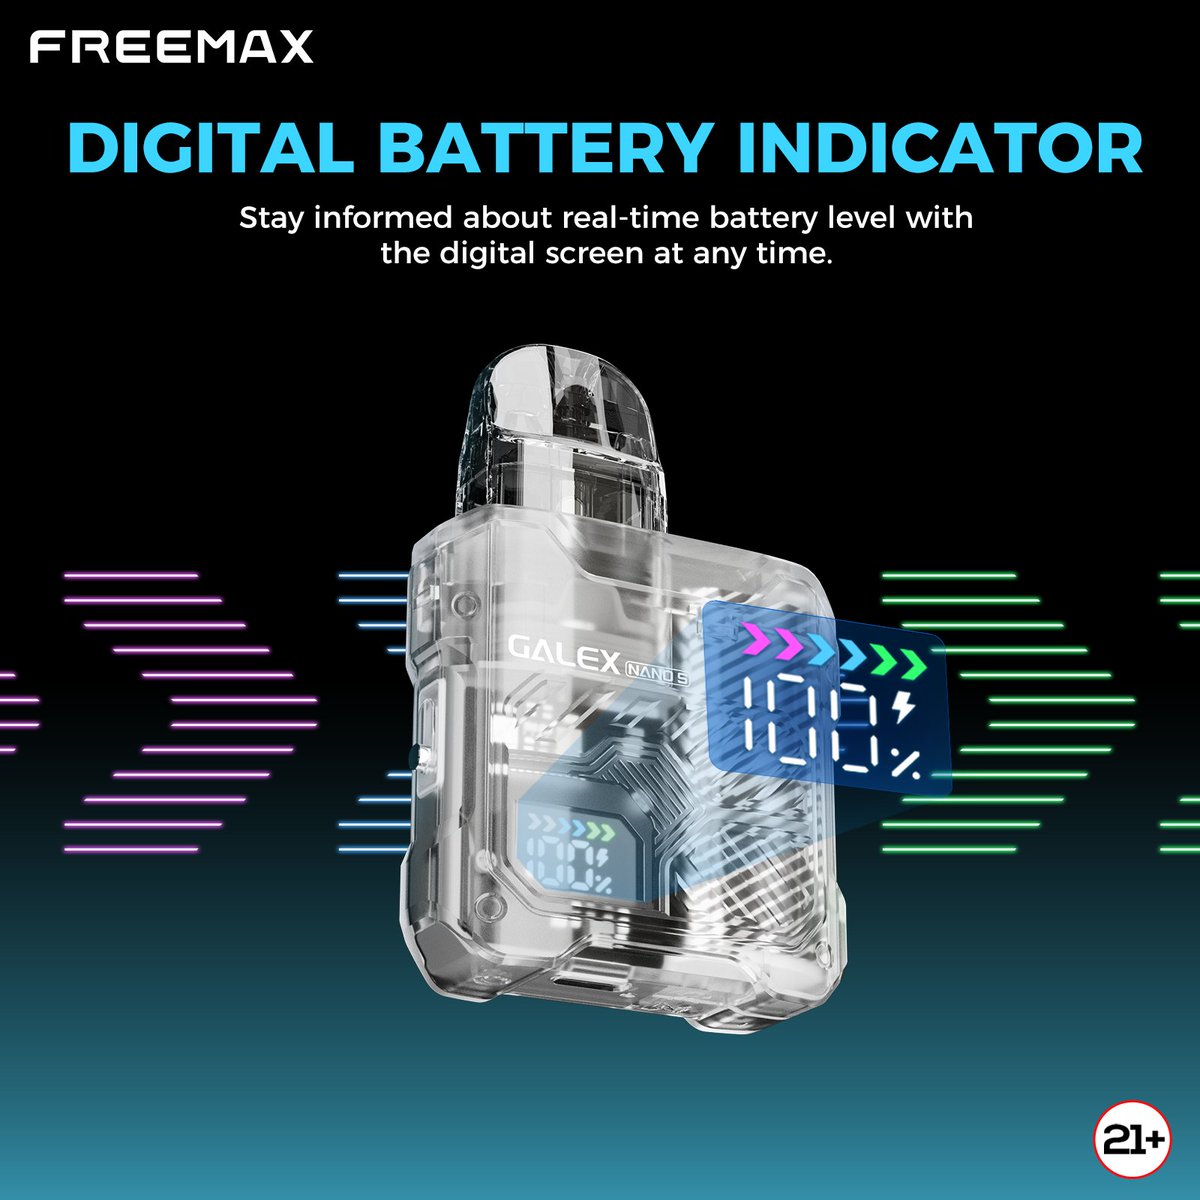 Digital Battery Indicator - Stay informed about real-time battery level with the digital screen at any time. 👍
.
.
.
.
.
Warning: This product contains nicotine. Nicotine is an addictive chemical.
Must be 21+.
-
#freemaxvape #galexnanoS #galexseries #newlaunch #podsystem